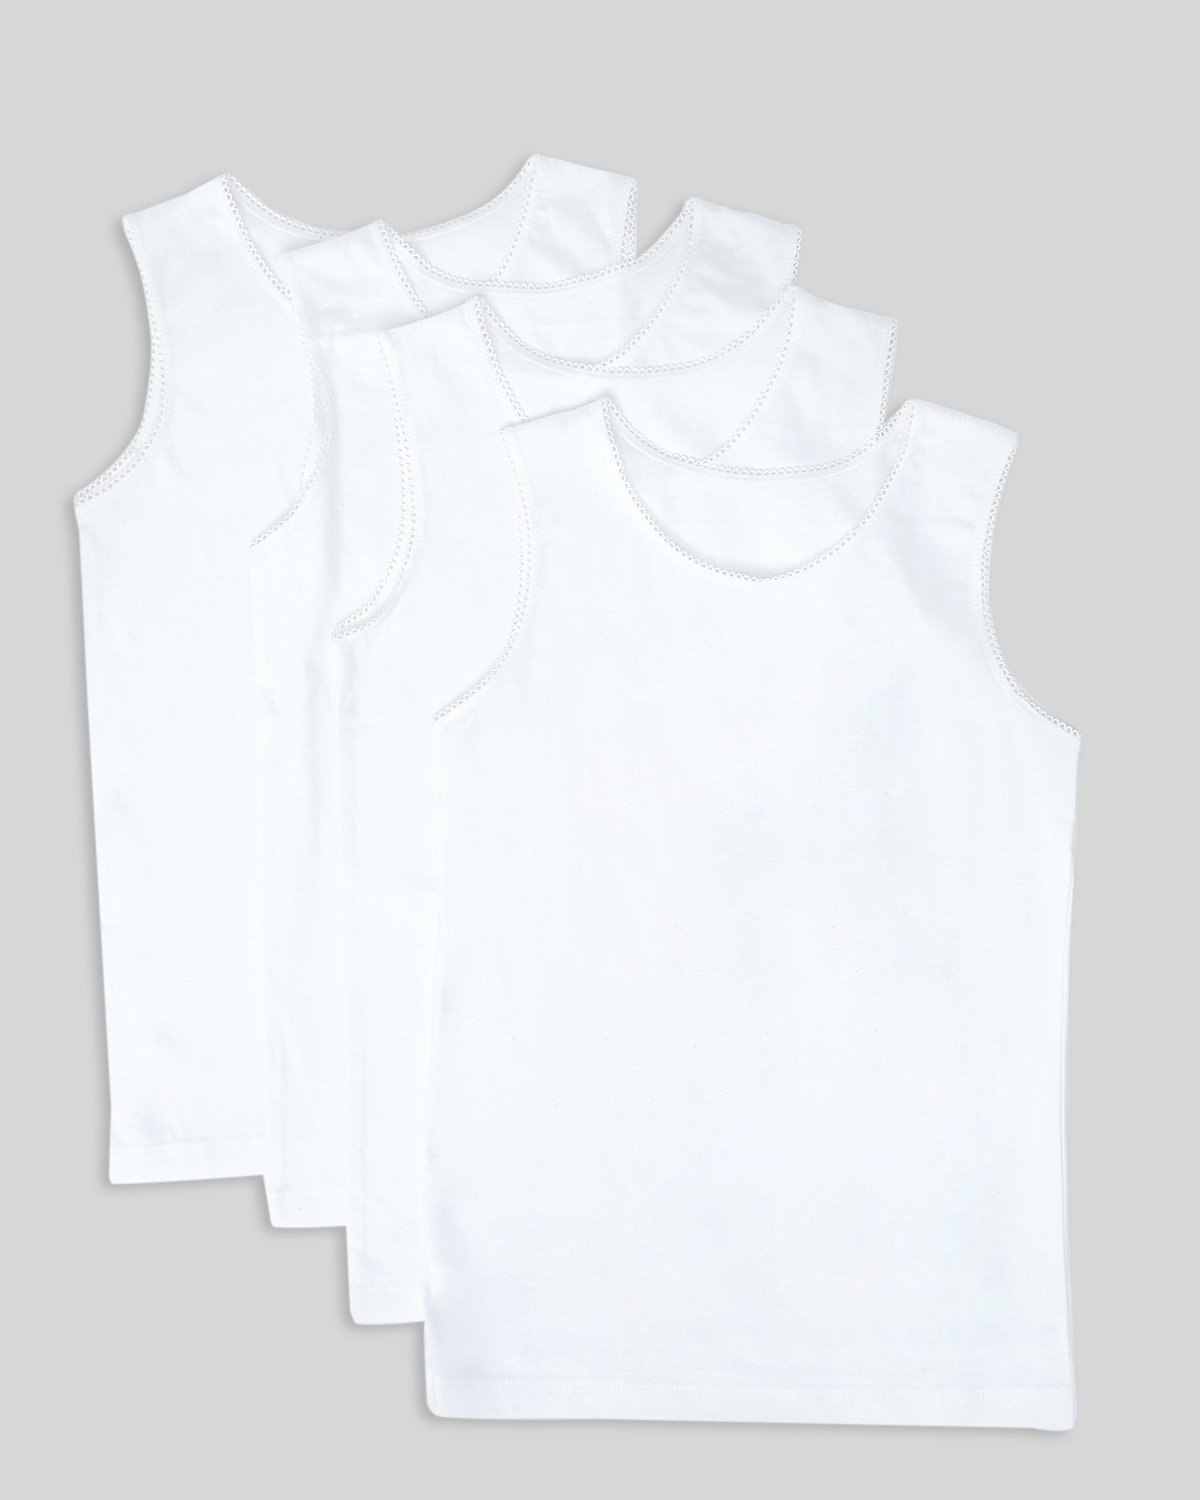 Dunnes Stores | White Girls Sleeveless Vests – Pack Of 4 (2-12 years)